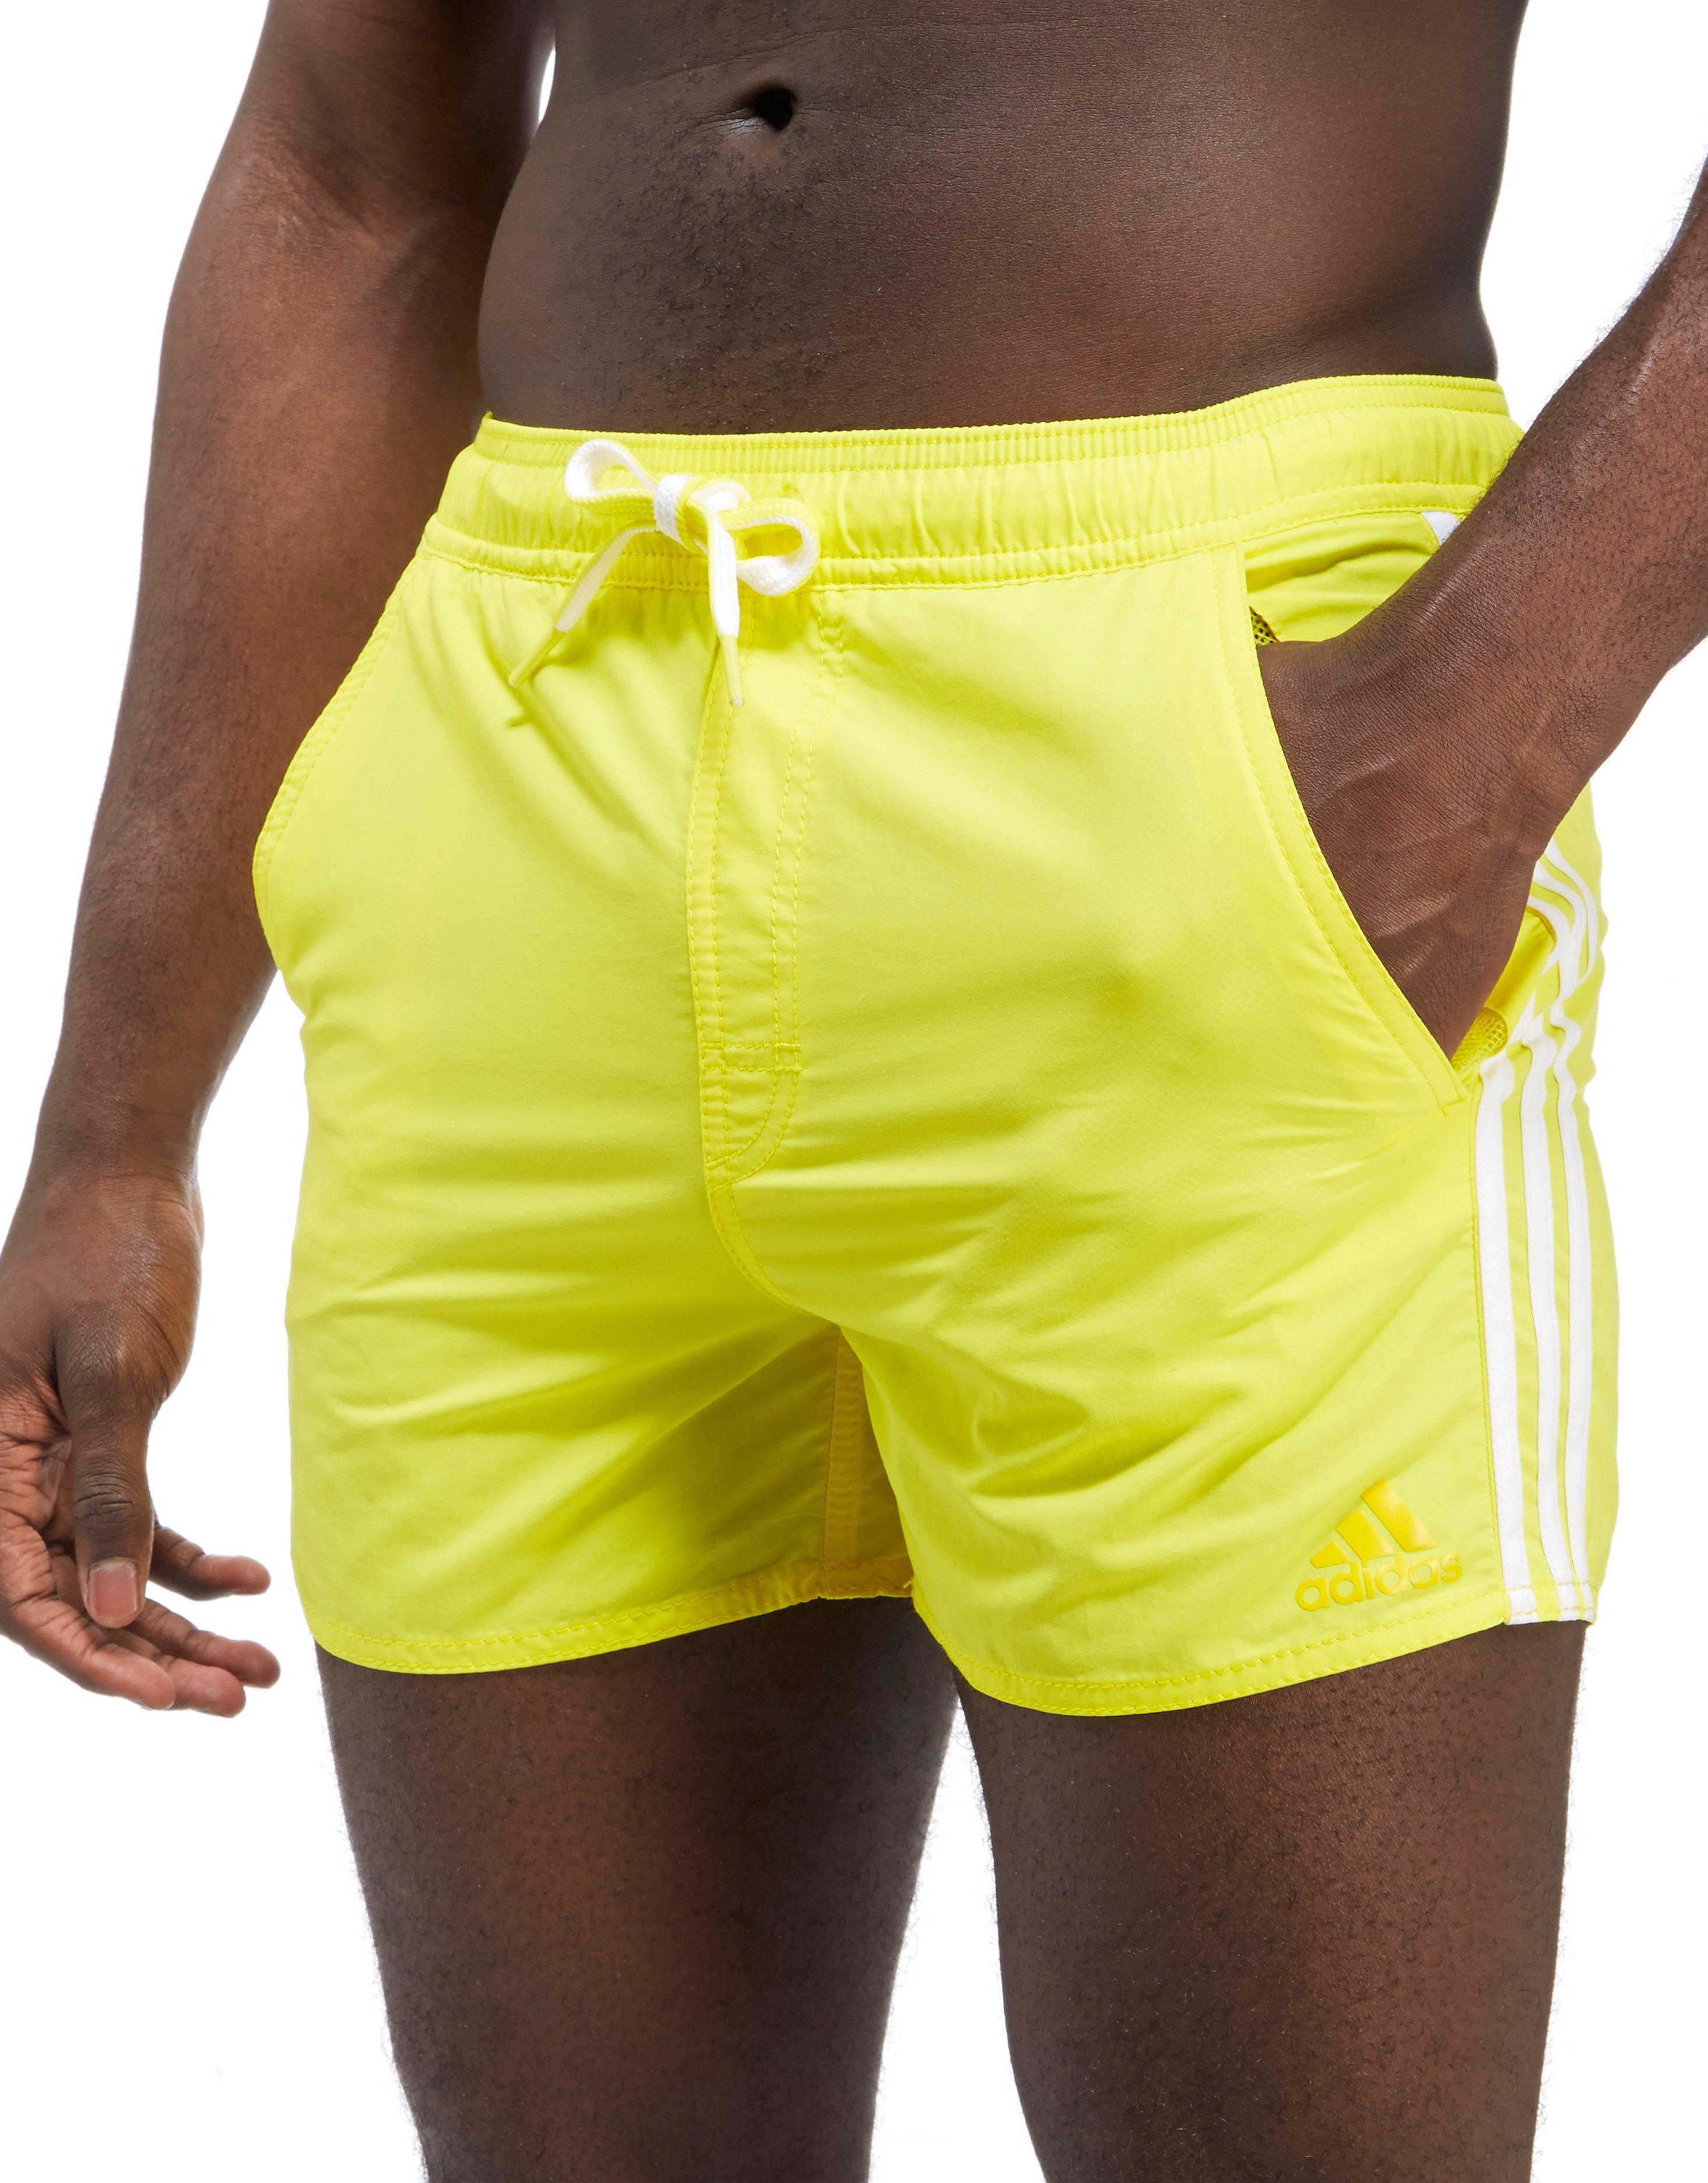 adidas Synthetic 3-stripe Swim Shorts in Yellow for Men - Lyst